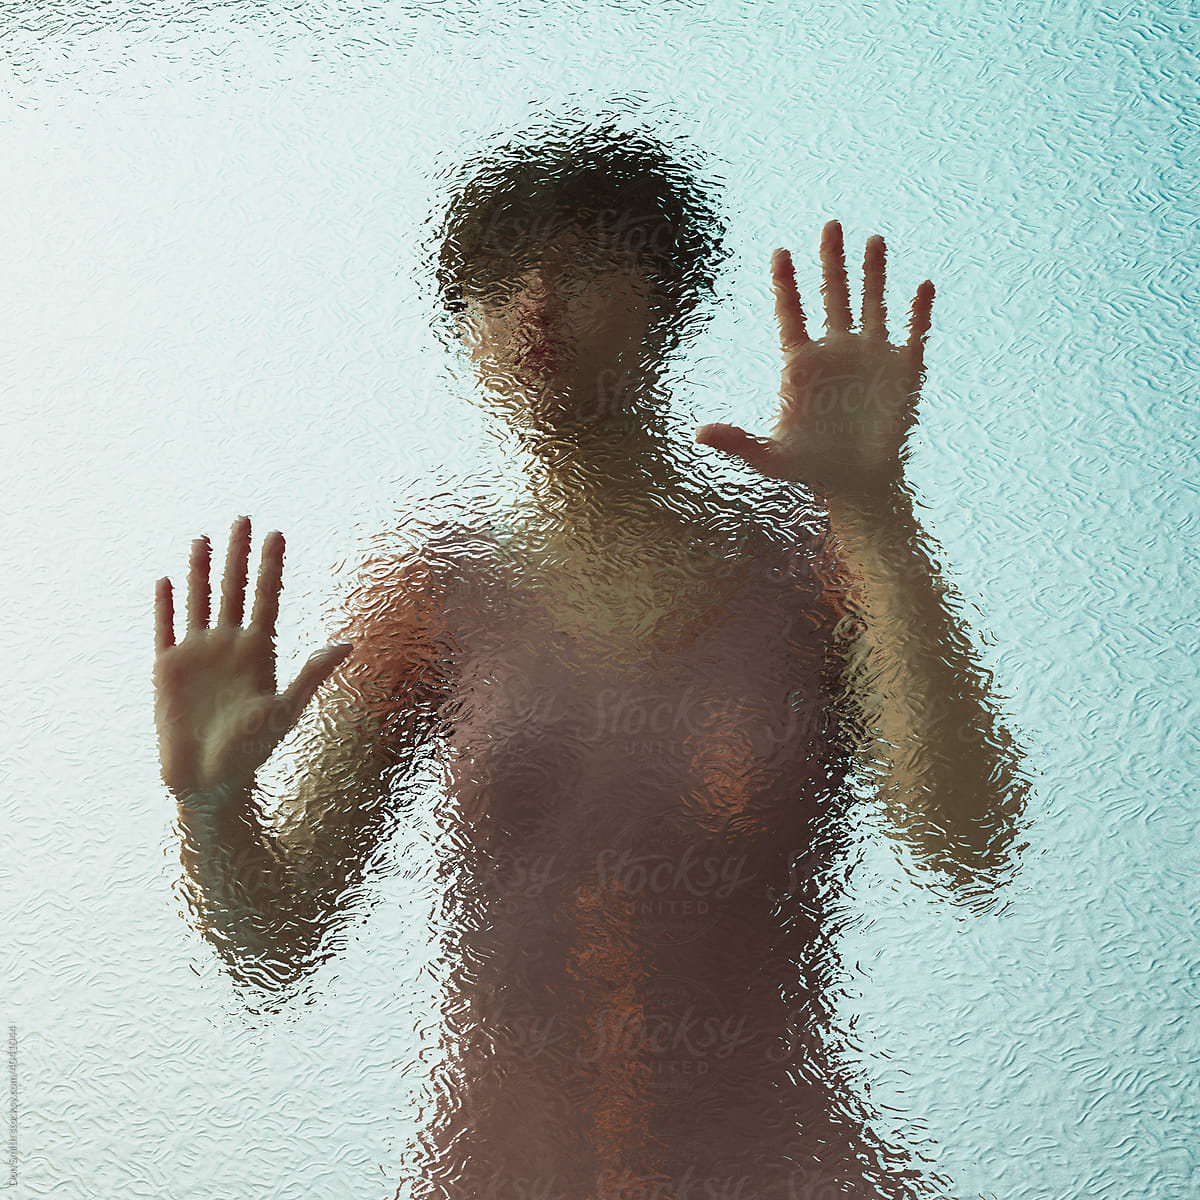 Reflection series: woman trapped